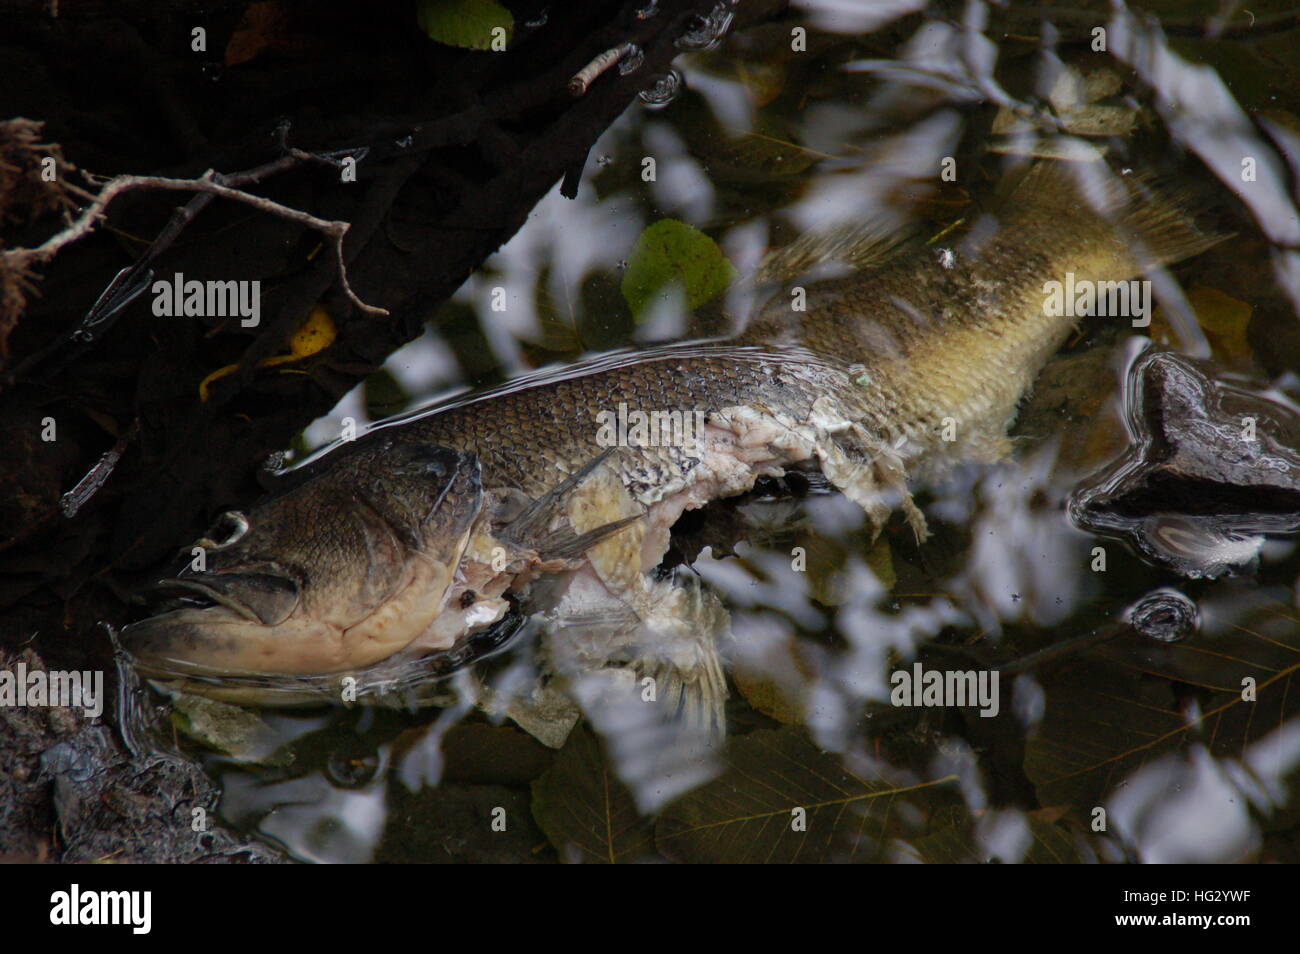 dead fish floating in water Stock Photo